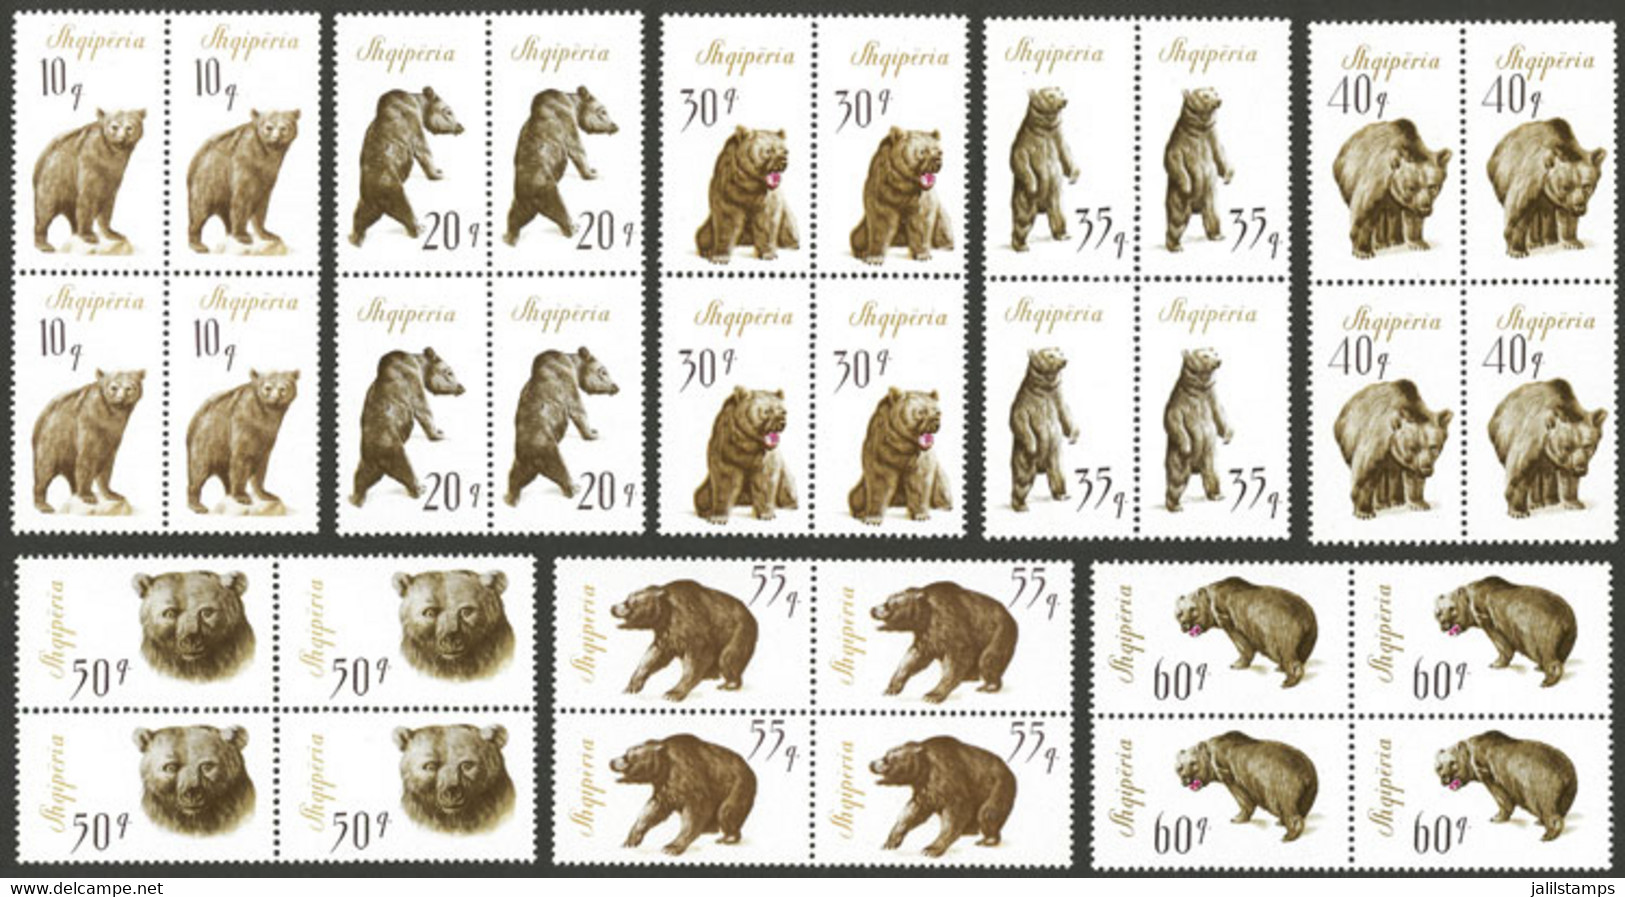 ALBANIA: Sc.884/91, 1965 Bears, Cmpl. Set Of 8 Values In MNH Blocks Of 4, Excellent Quality! - Albania